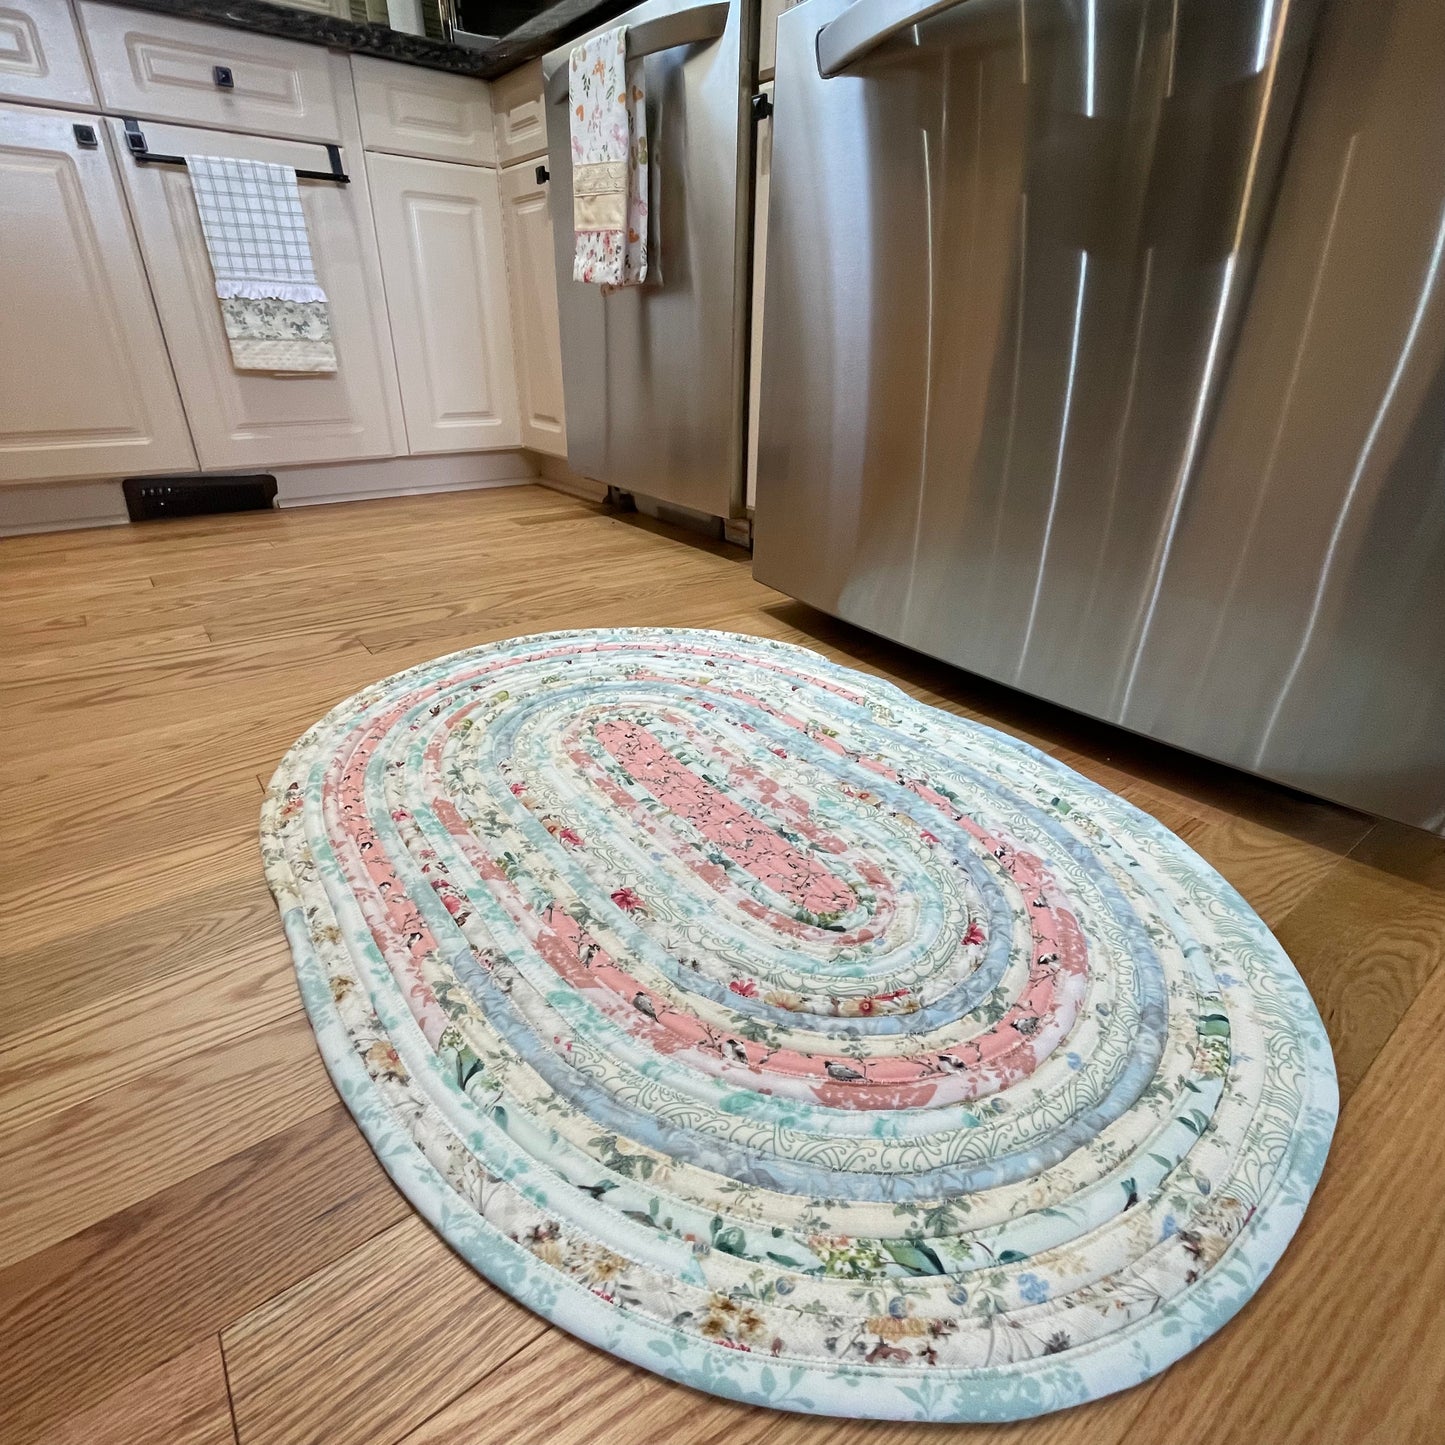 Kitchen Throw Rug Handmade Cotton Pink and Blue Bedside Or Nursery Rug